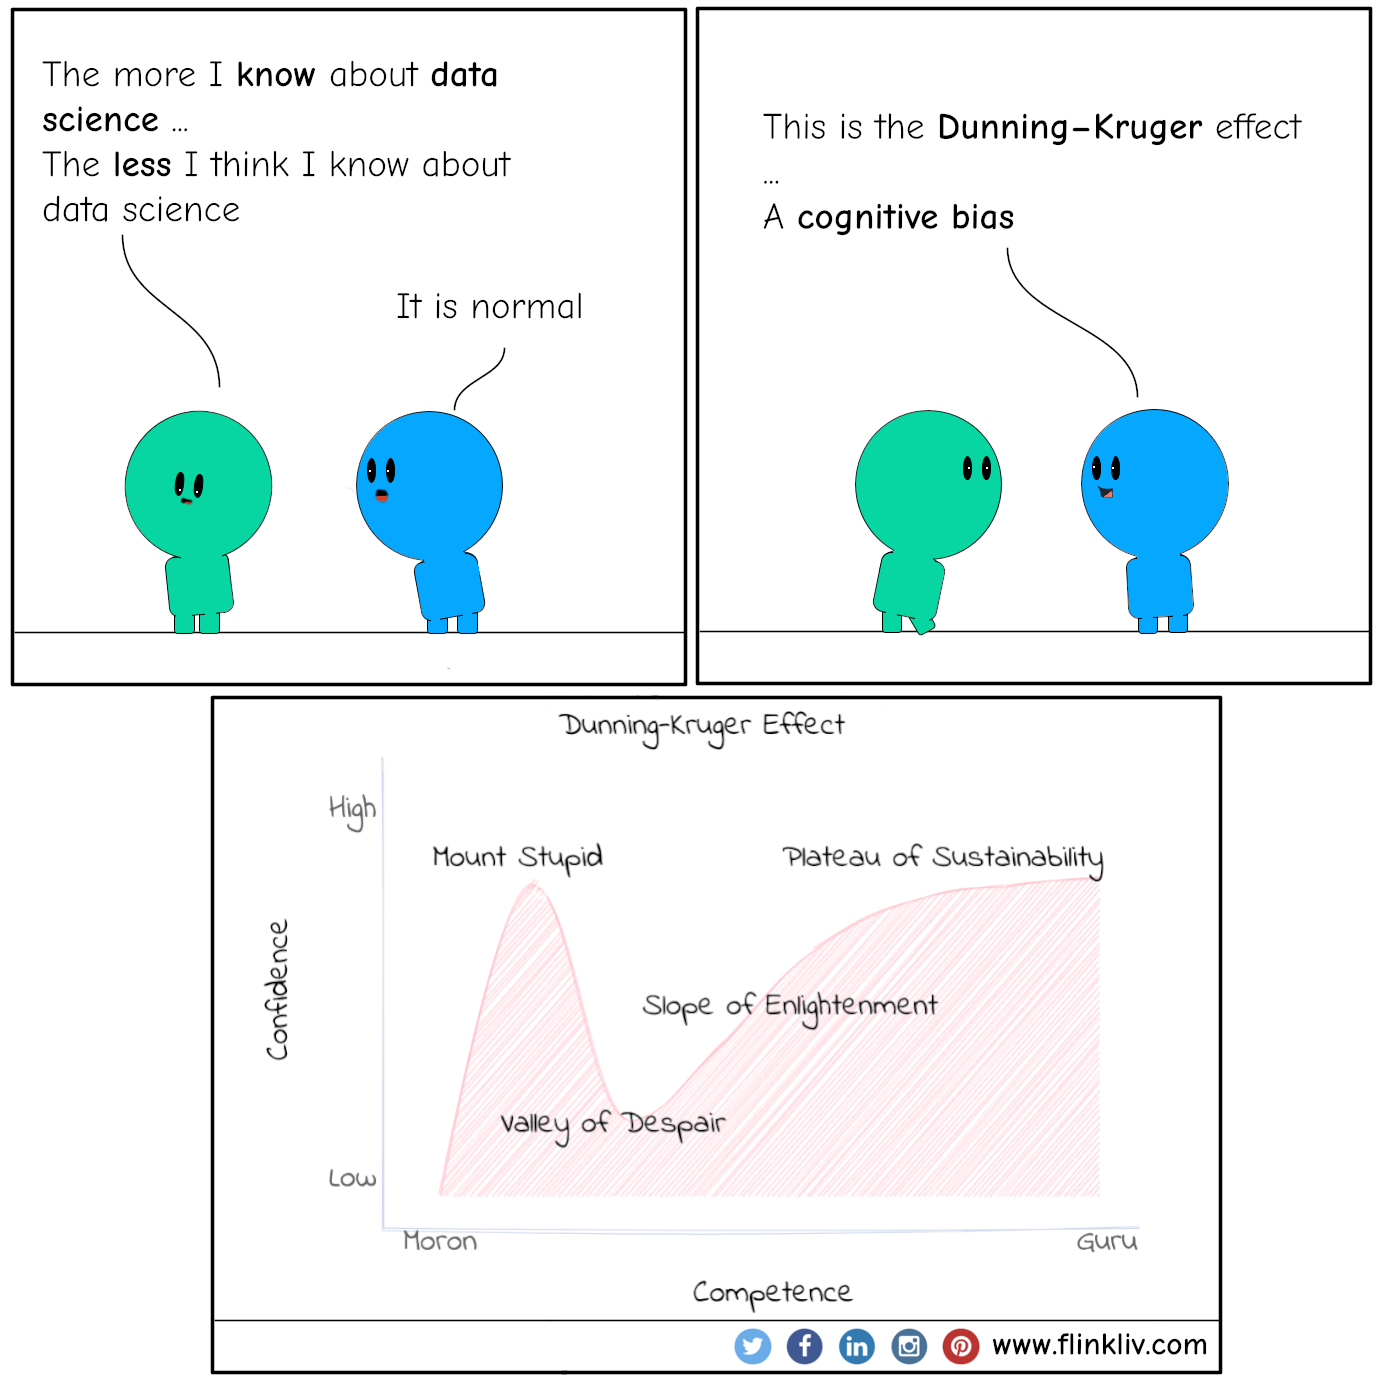 Conversation between A and B about the Dunning–Kruger-effect bias. A: The more I know about data science the less I think I know about data science B: It is normal B: This is the Dunning–Kruger effect, a cognitive bias.
				By Flinkliv.com